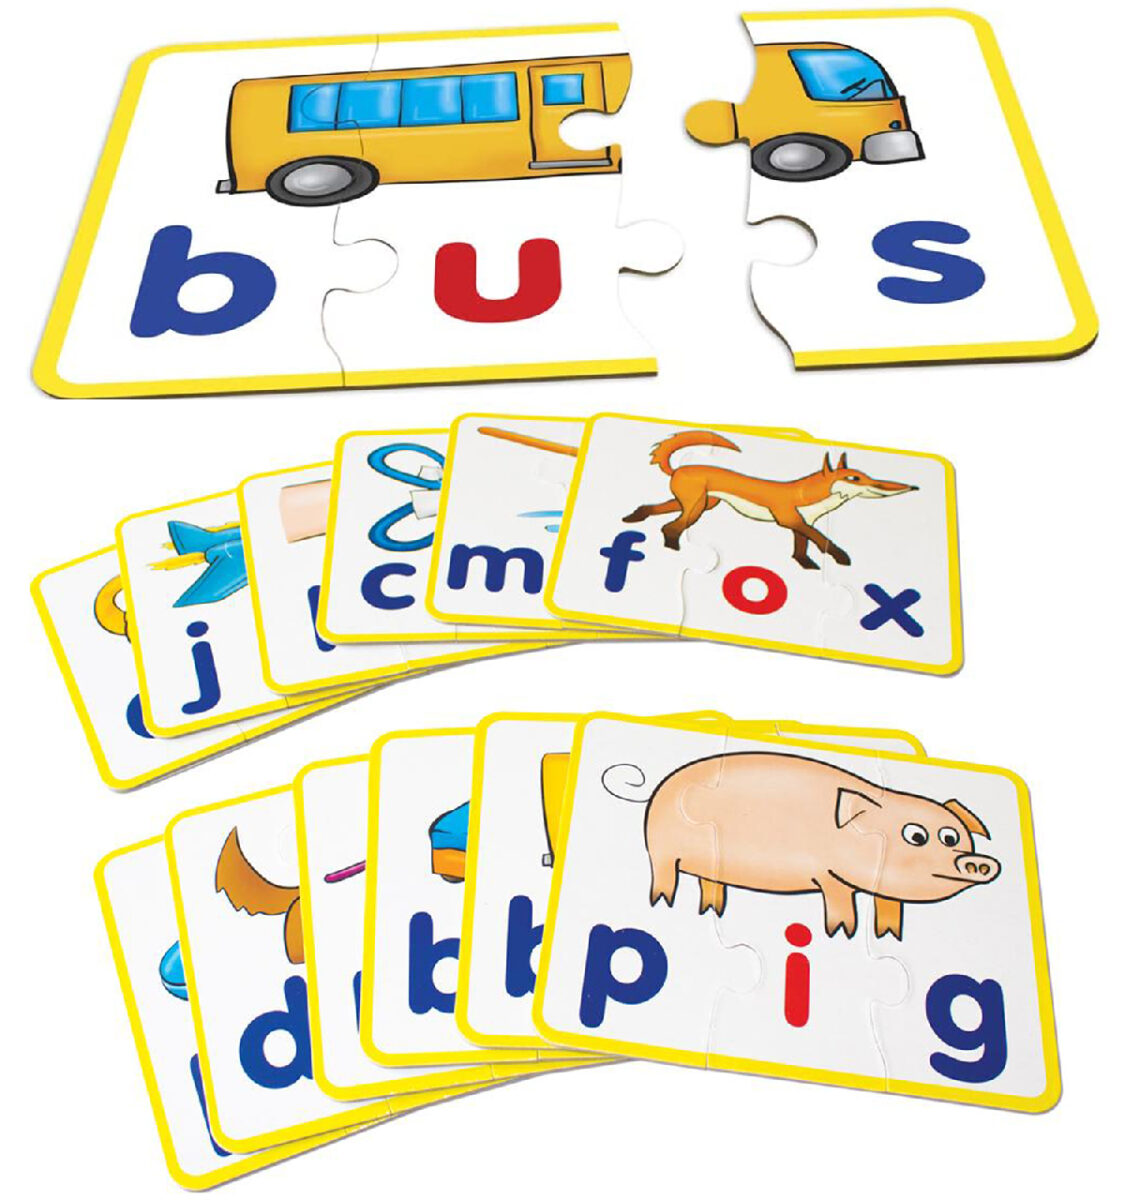 CVC Puzzles is a game for teaching consonant vowel consonant patterns and building words.